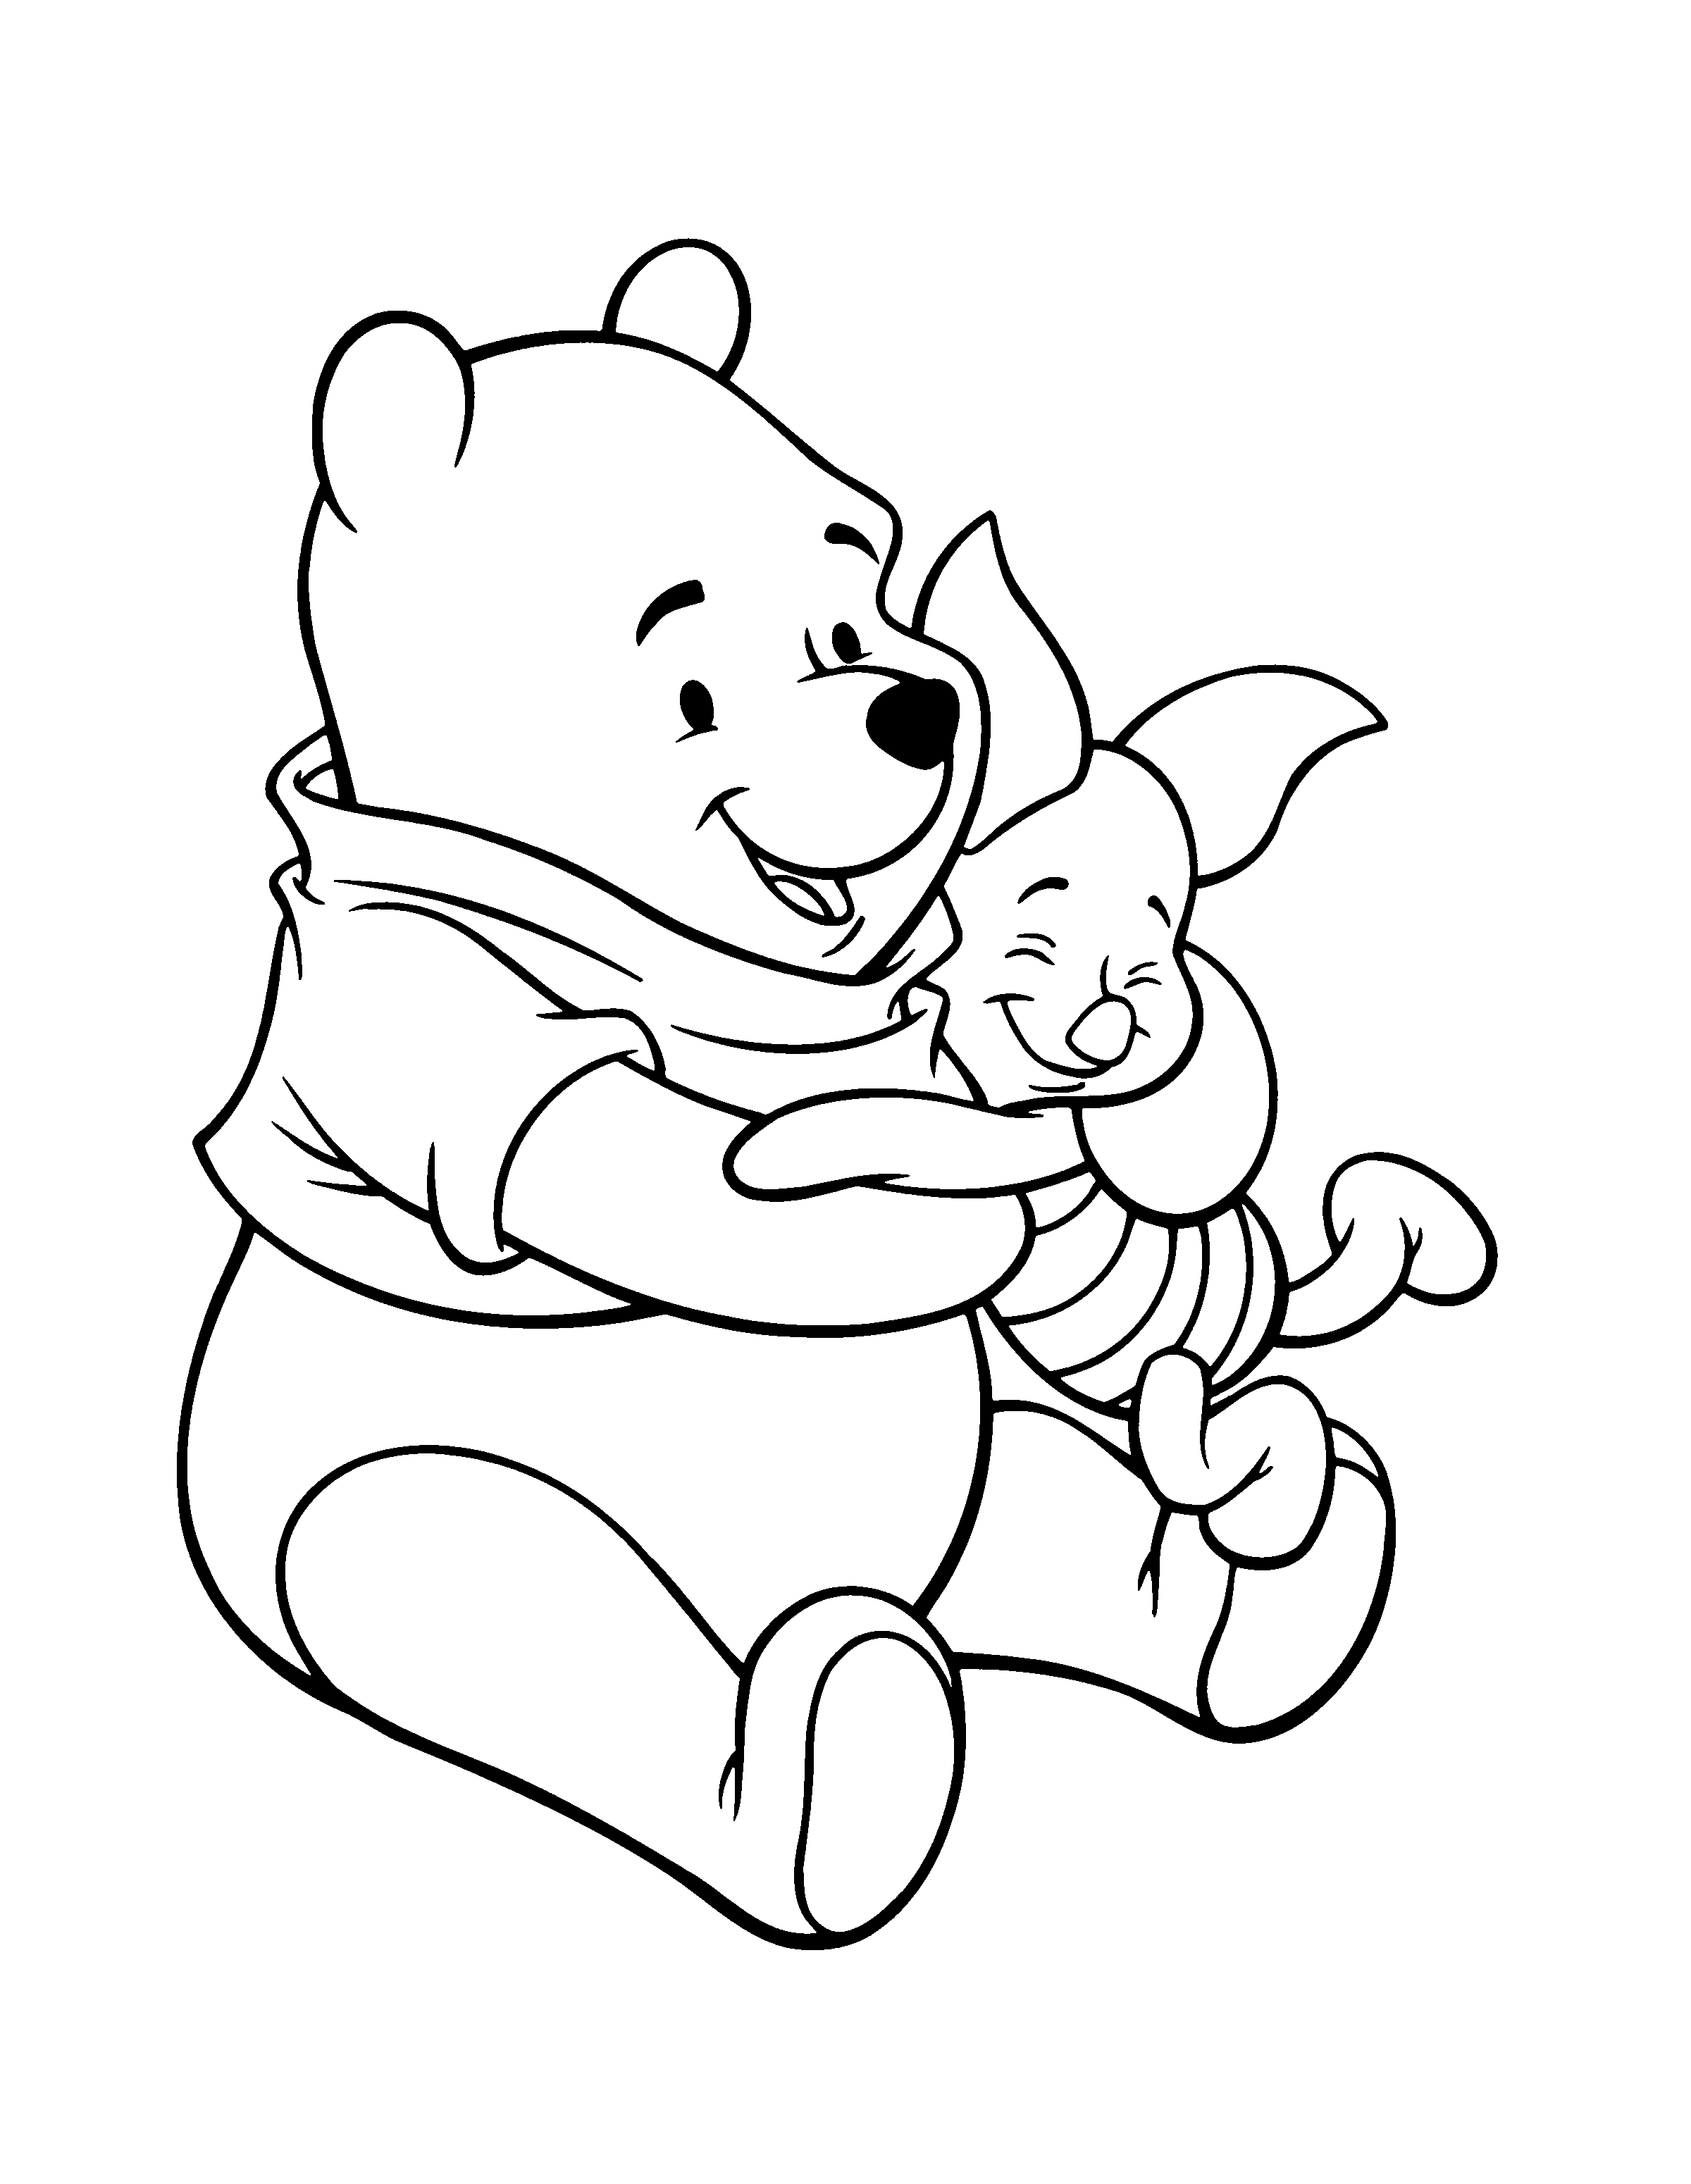 Classic Winnie The Pooh Coloring Pages Printable 35